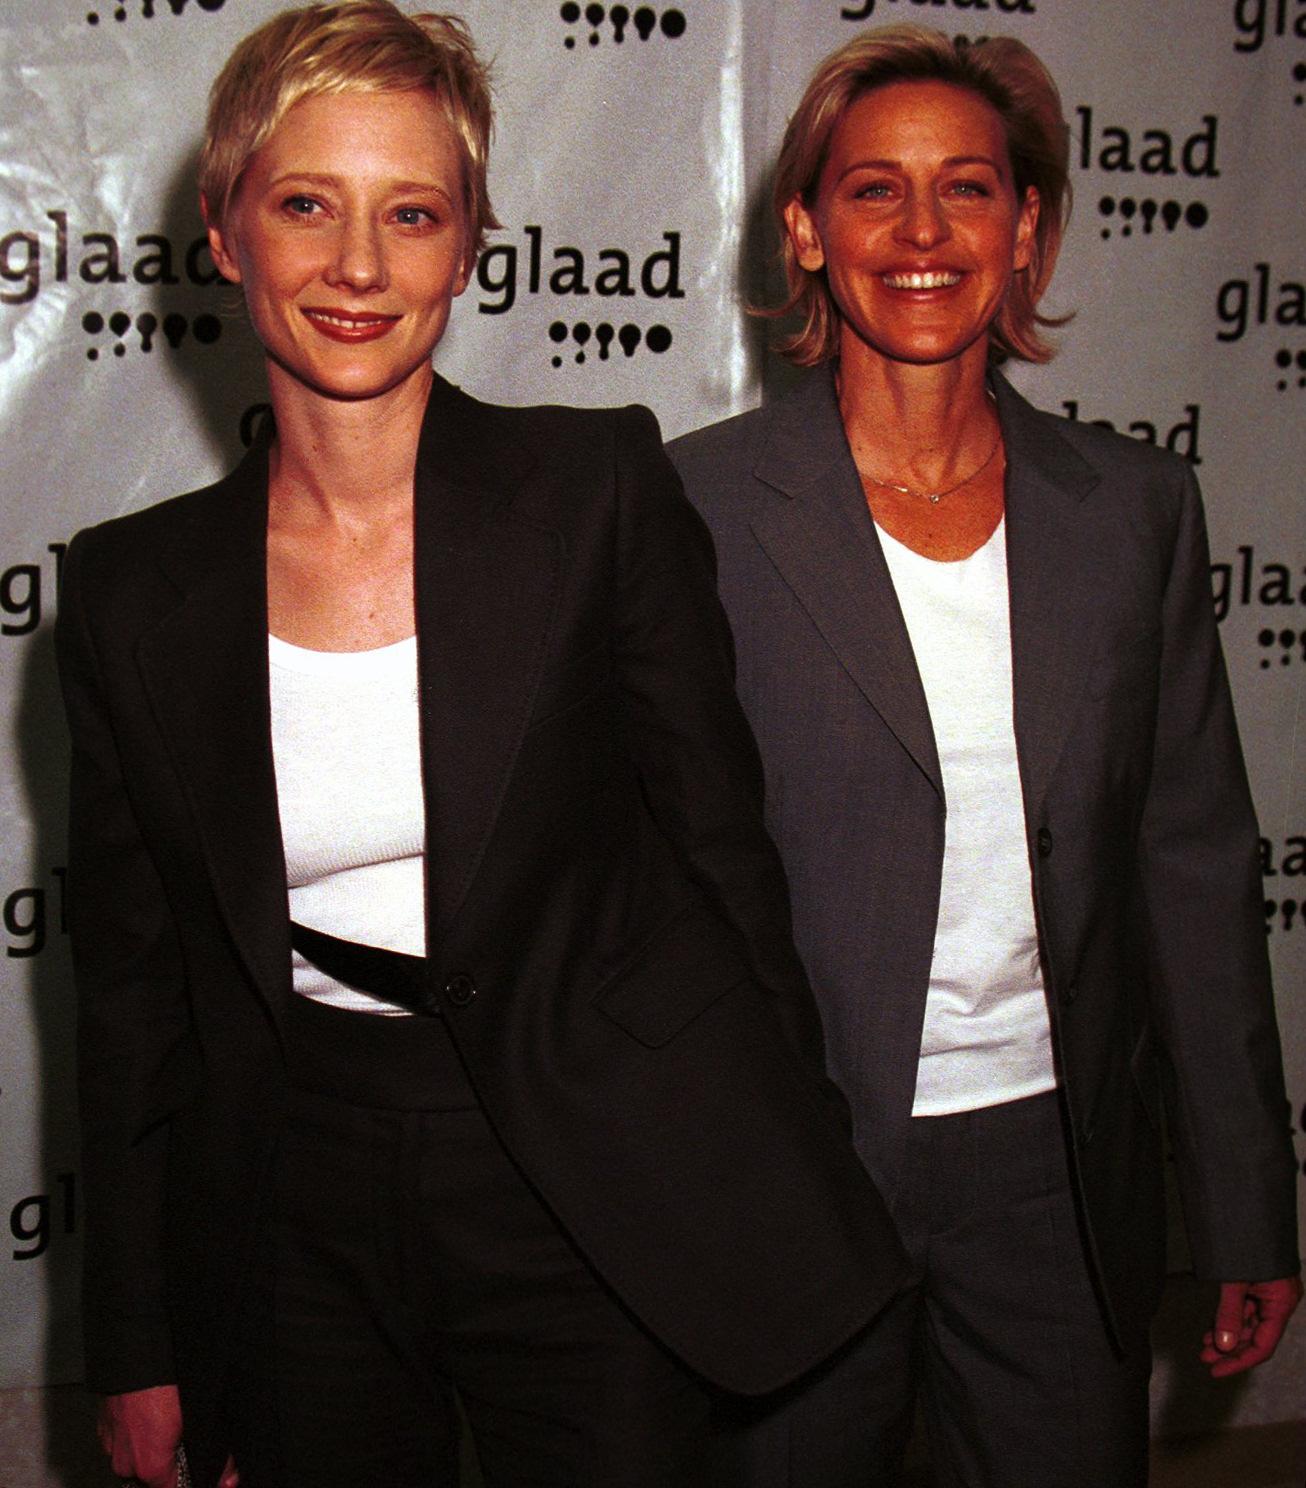 Anne Heche and Ellen DeGeneres at the 10th annual Gay & Lesbian Alliance Against Defamation (GLAAD) ceremony